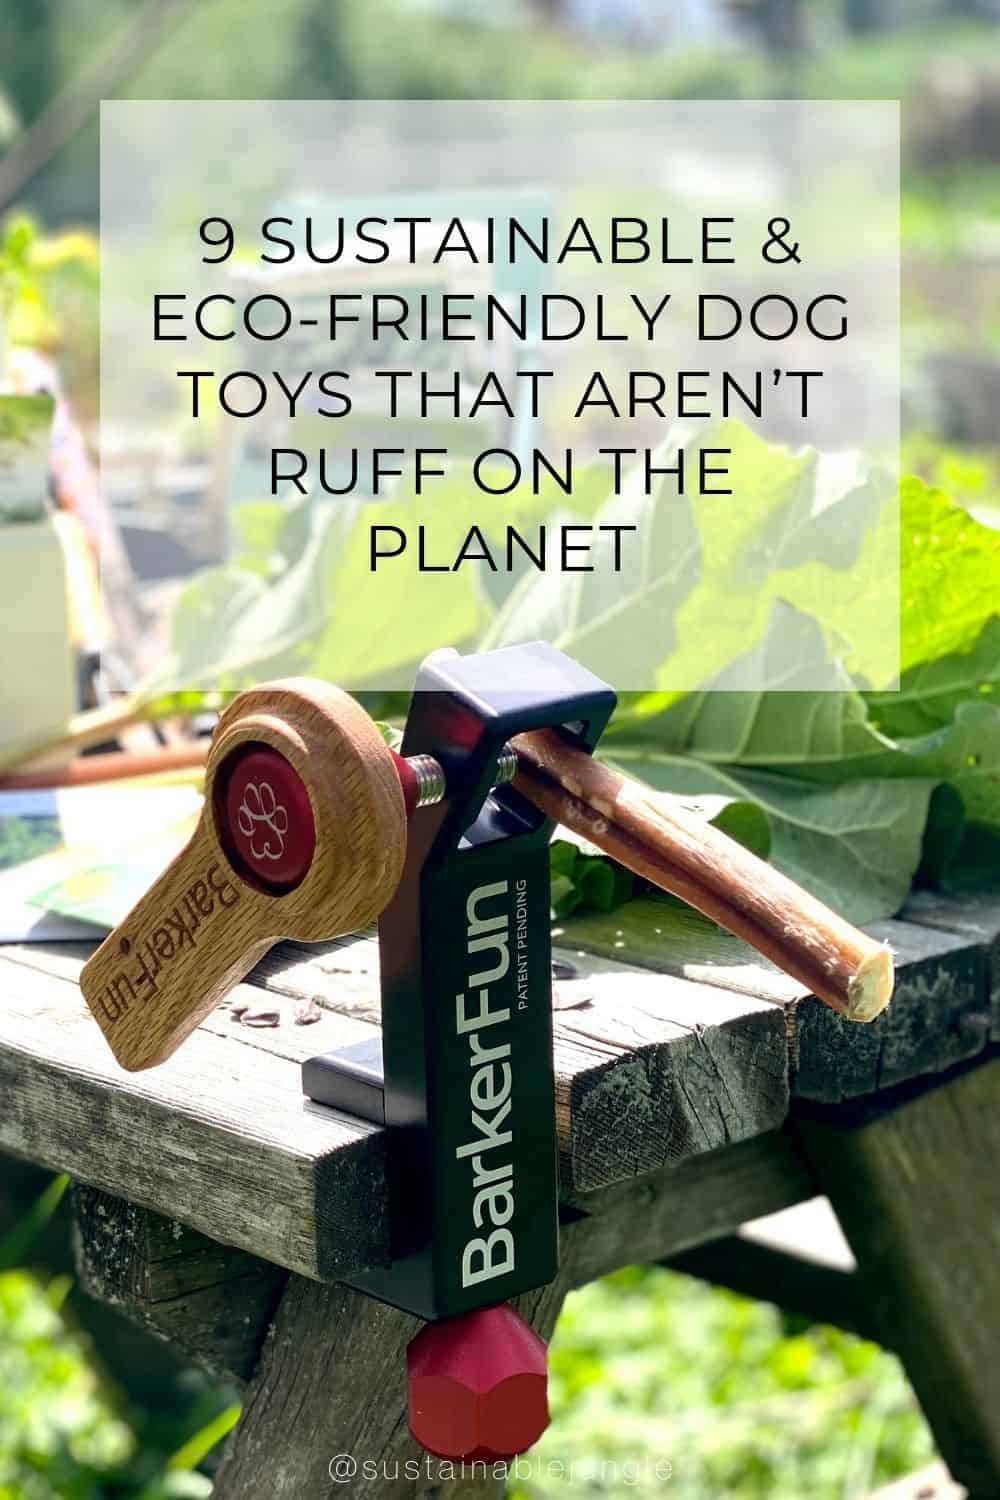 9 Sustainable & Eco-Friendly Dog Toys That Aren’t Ruff On The Planet Image by Sustainable Jungle #ecofriendlydogtoys #ecofriendlydogchewtoys #sustainabledogtoys #mostdurablesustainabledogtoys #ecofriendlypettoys #sustainablejungle